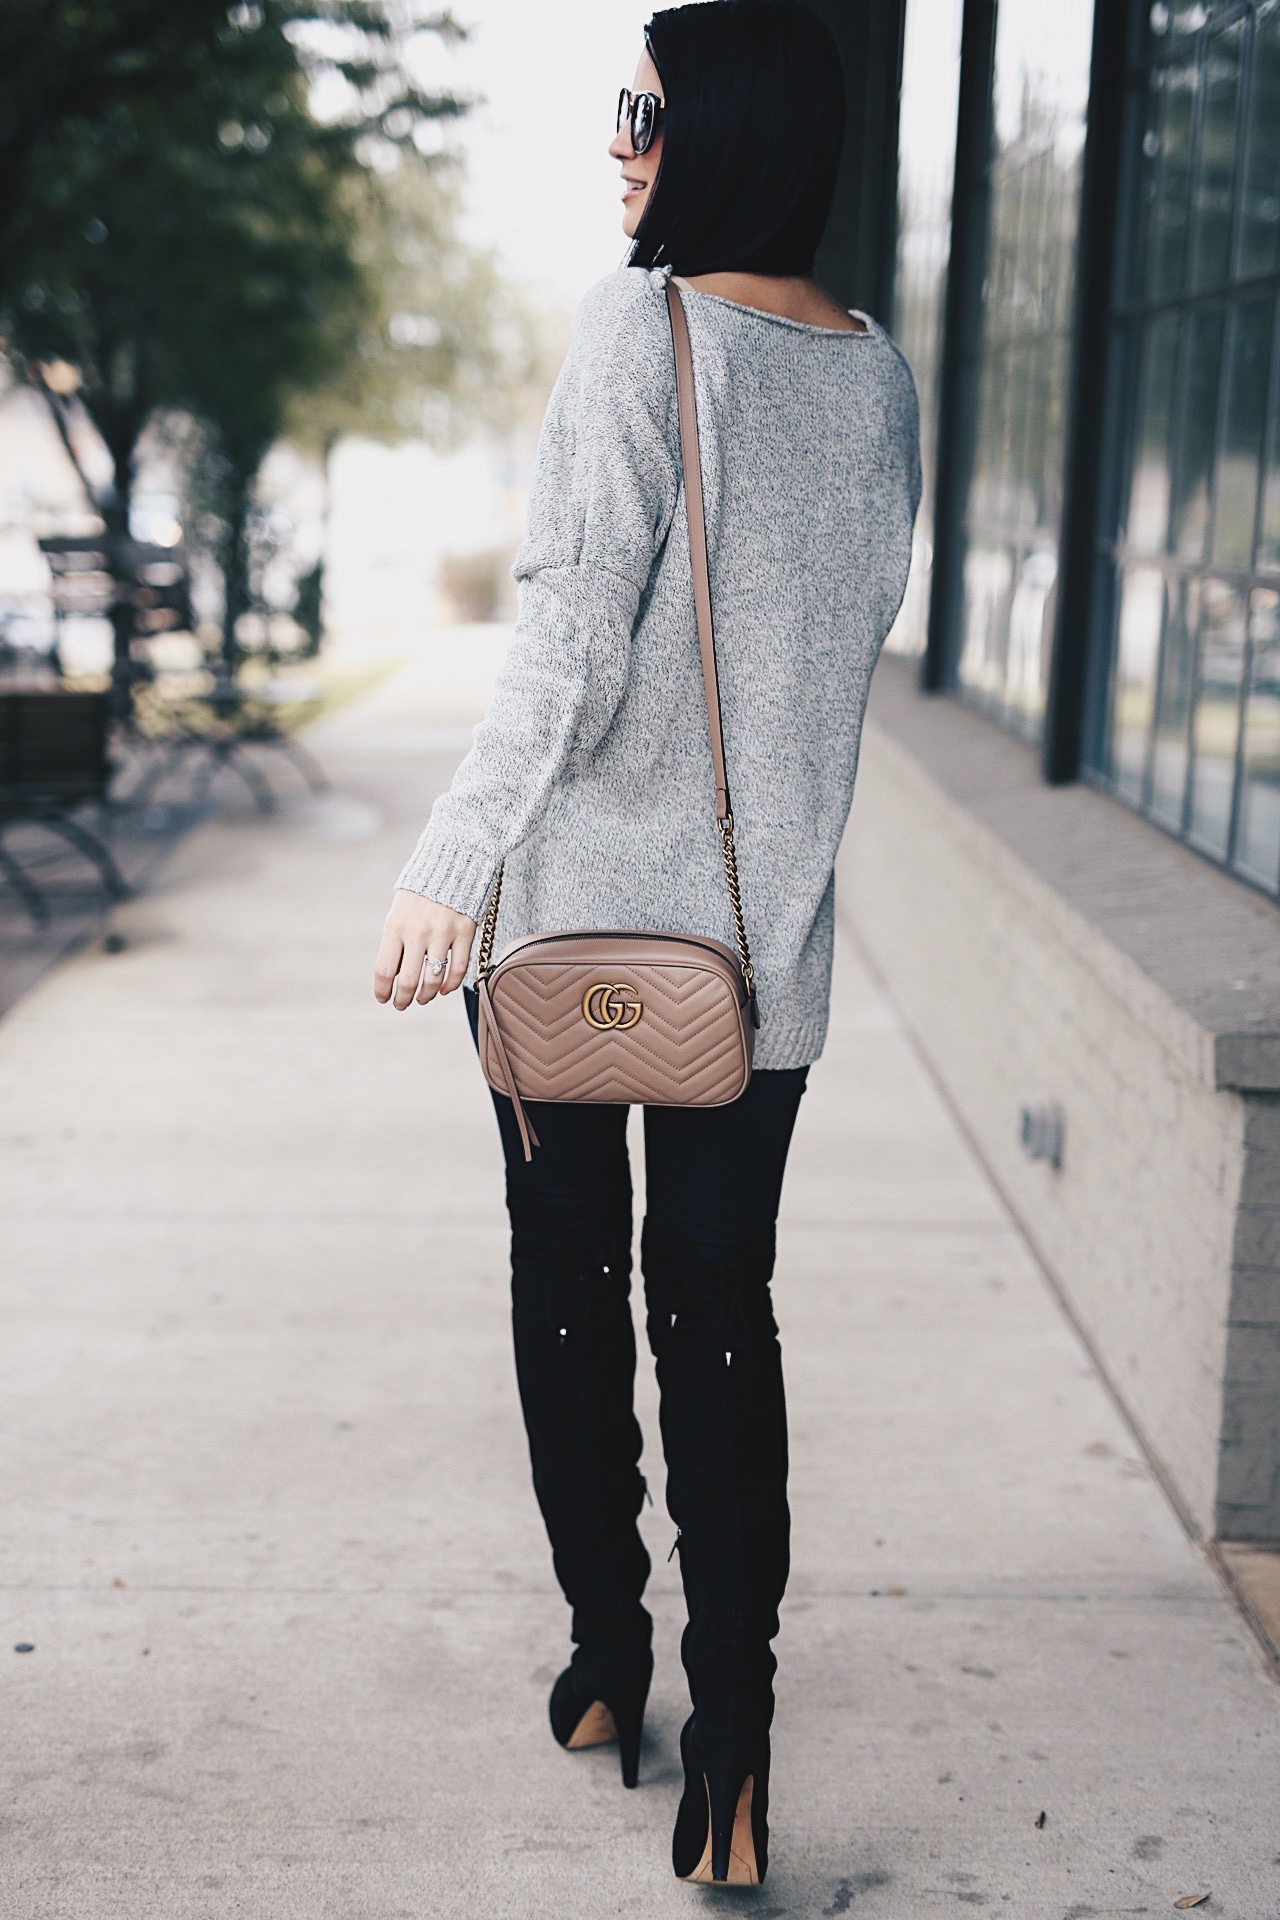 DTKAustin shares her favorite casual Winter look. Ashley is wearing a Chicwish sweater, Express jeans, Gucci Marmont Bag and OTK Boots. Click for more outfit details!